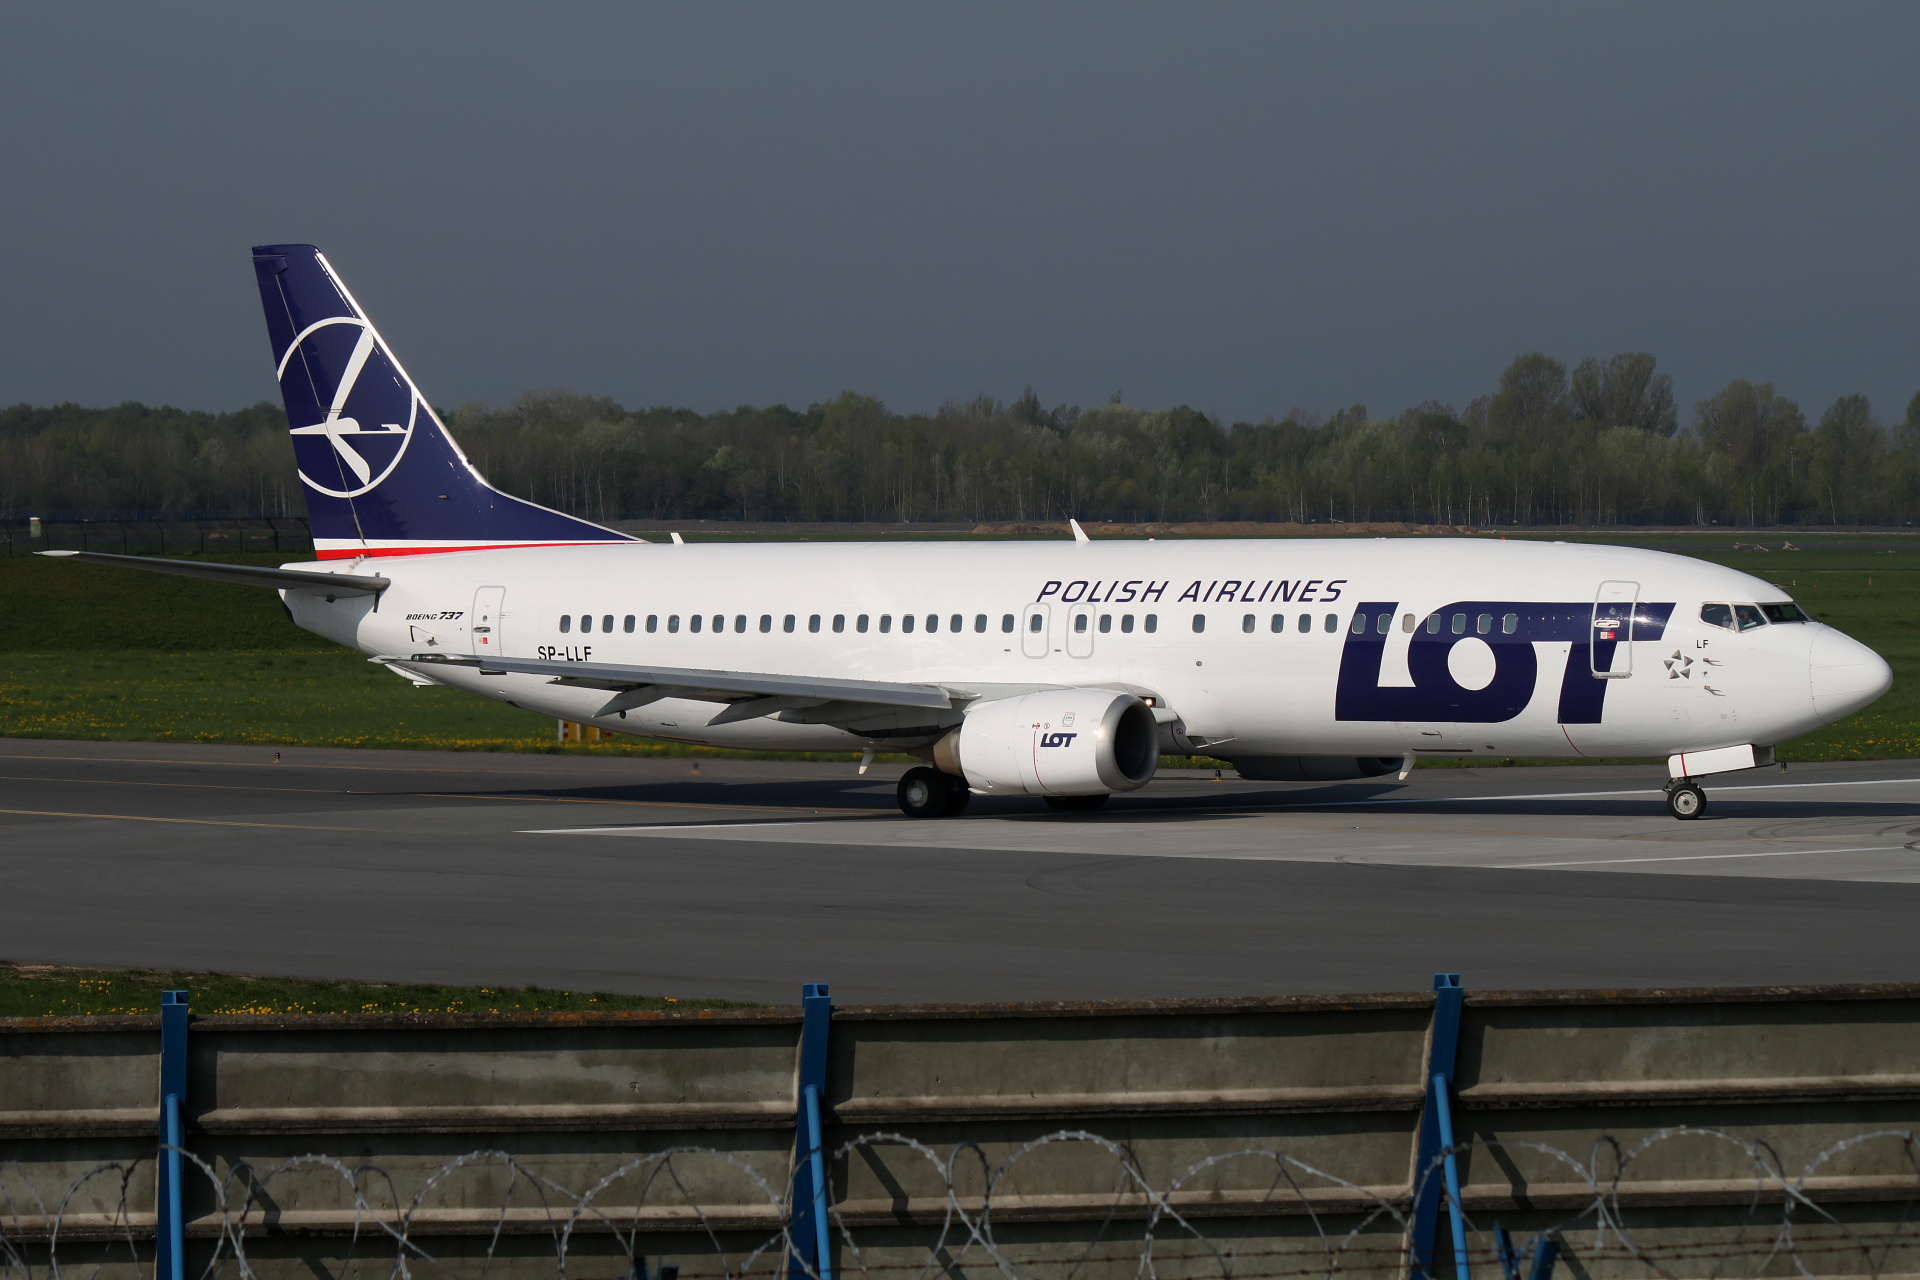 SP-LLF (Aircraft » EPWA Spotting » Boeing 737-400 » LOT Polish Airlines)